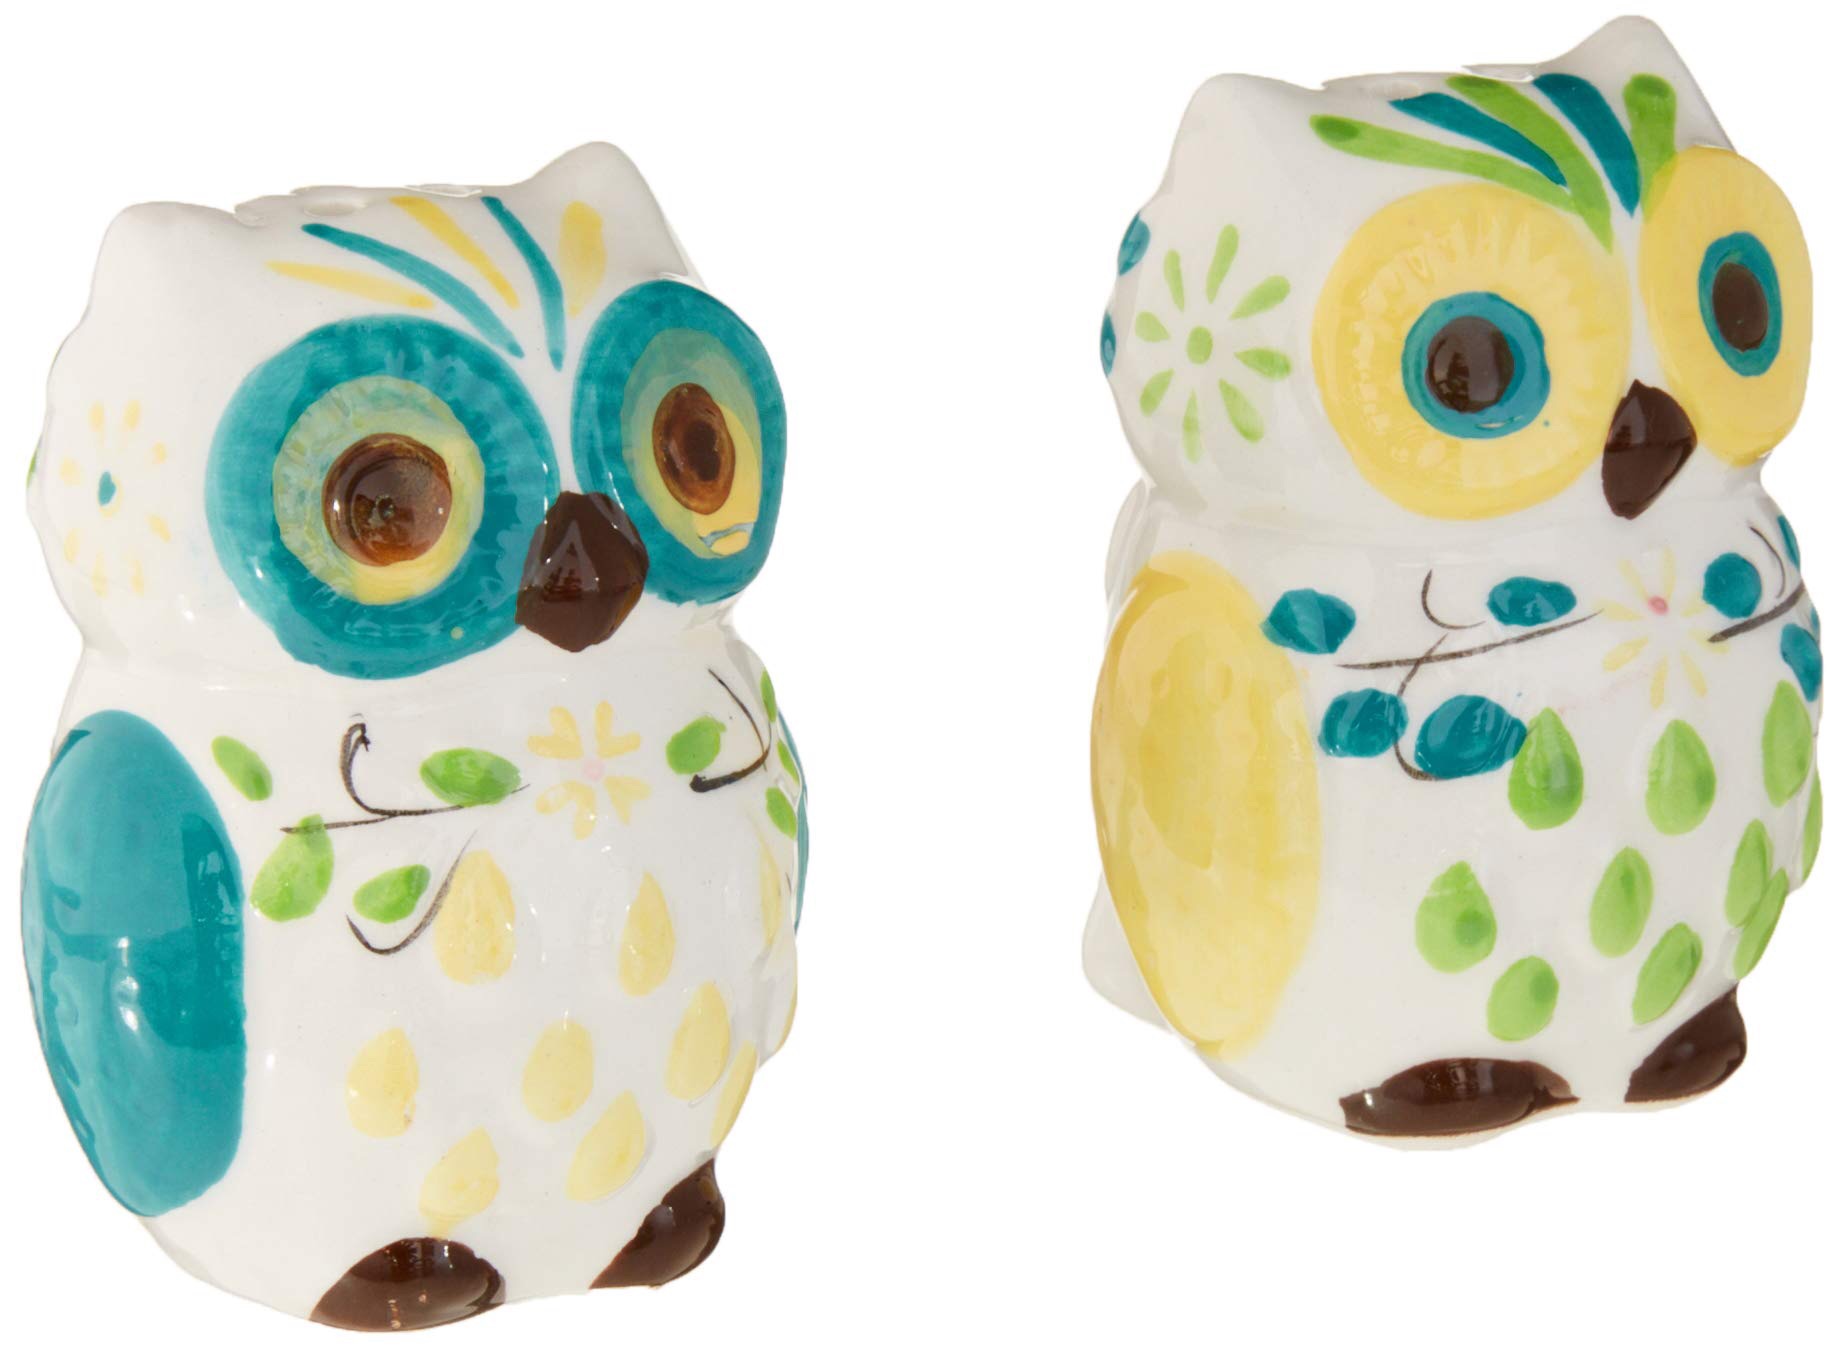 Amazon.com: Floral Owl Salt & Pepper Shakers, Hand-painted Ceramic by Boston Warehouse: Kitchen & Dining 猫头鹰手工调味瓶